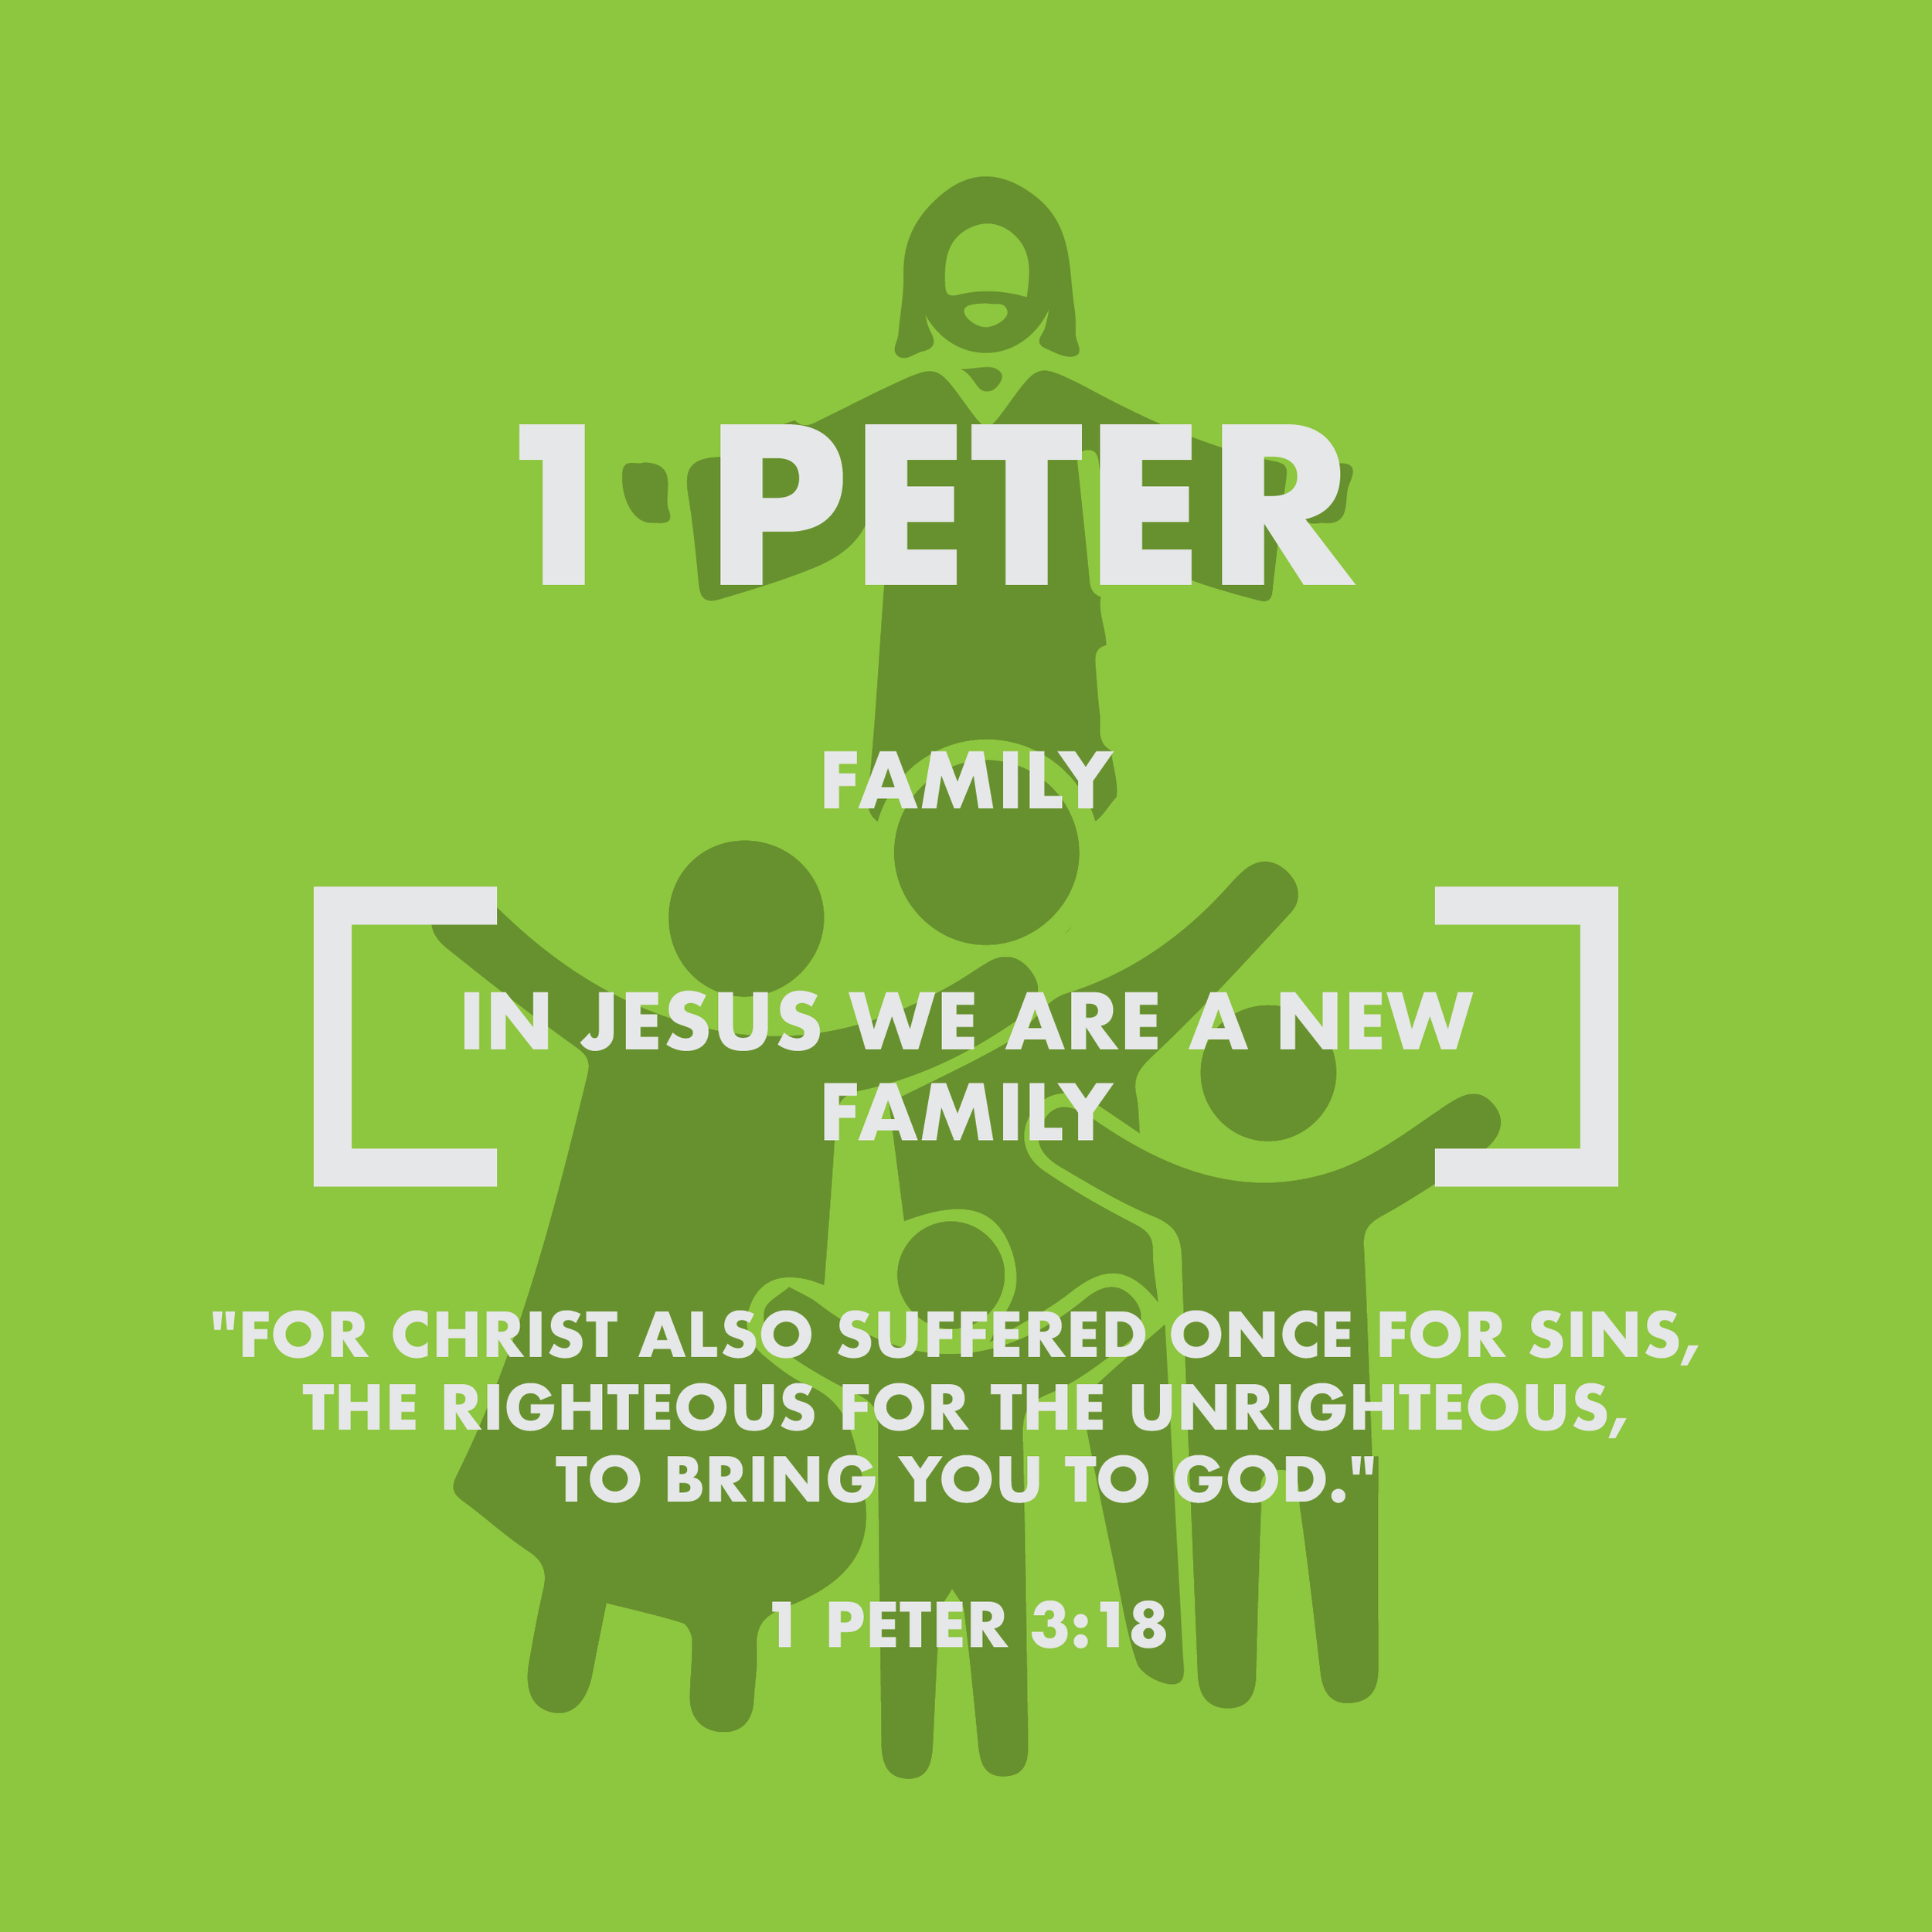 Books of the Bible_posters_58 1Peter.png